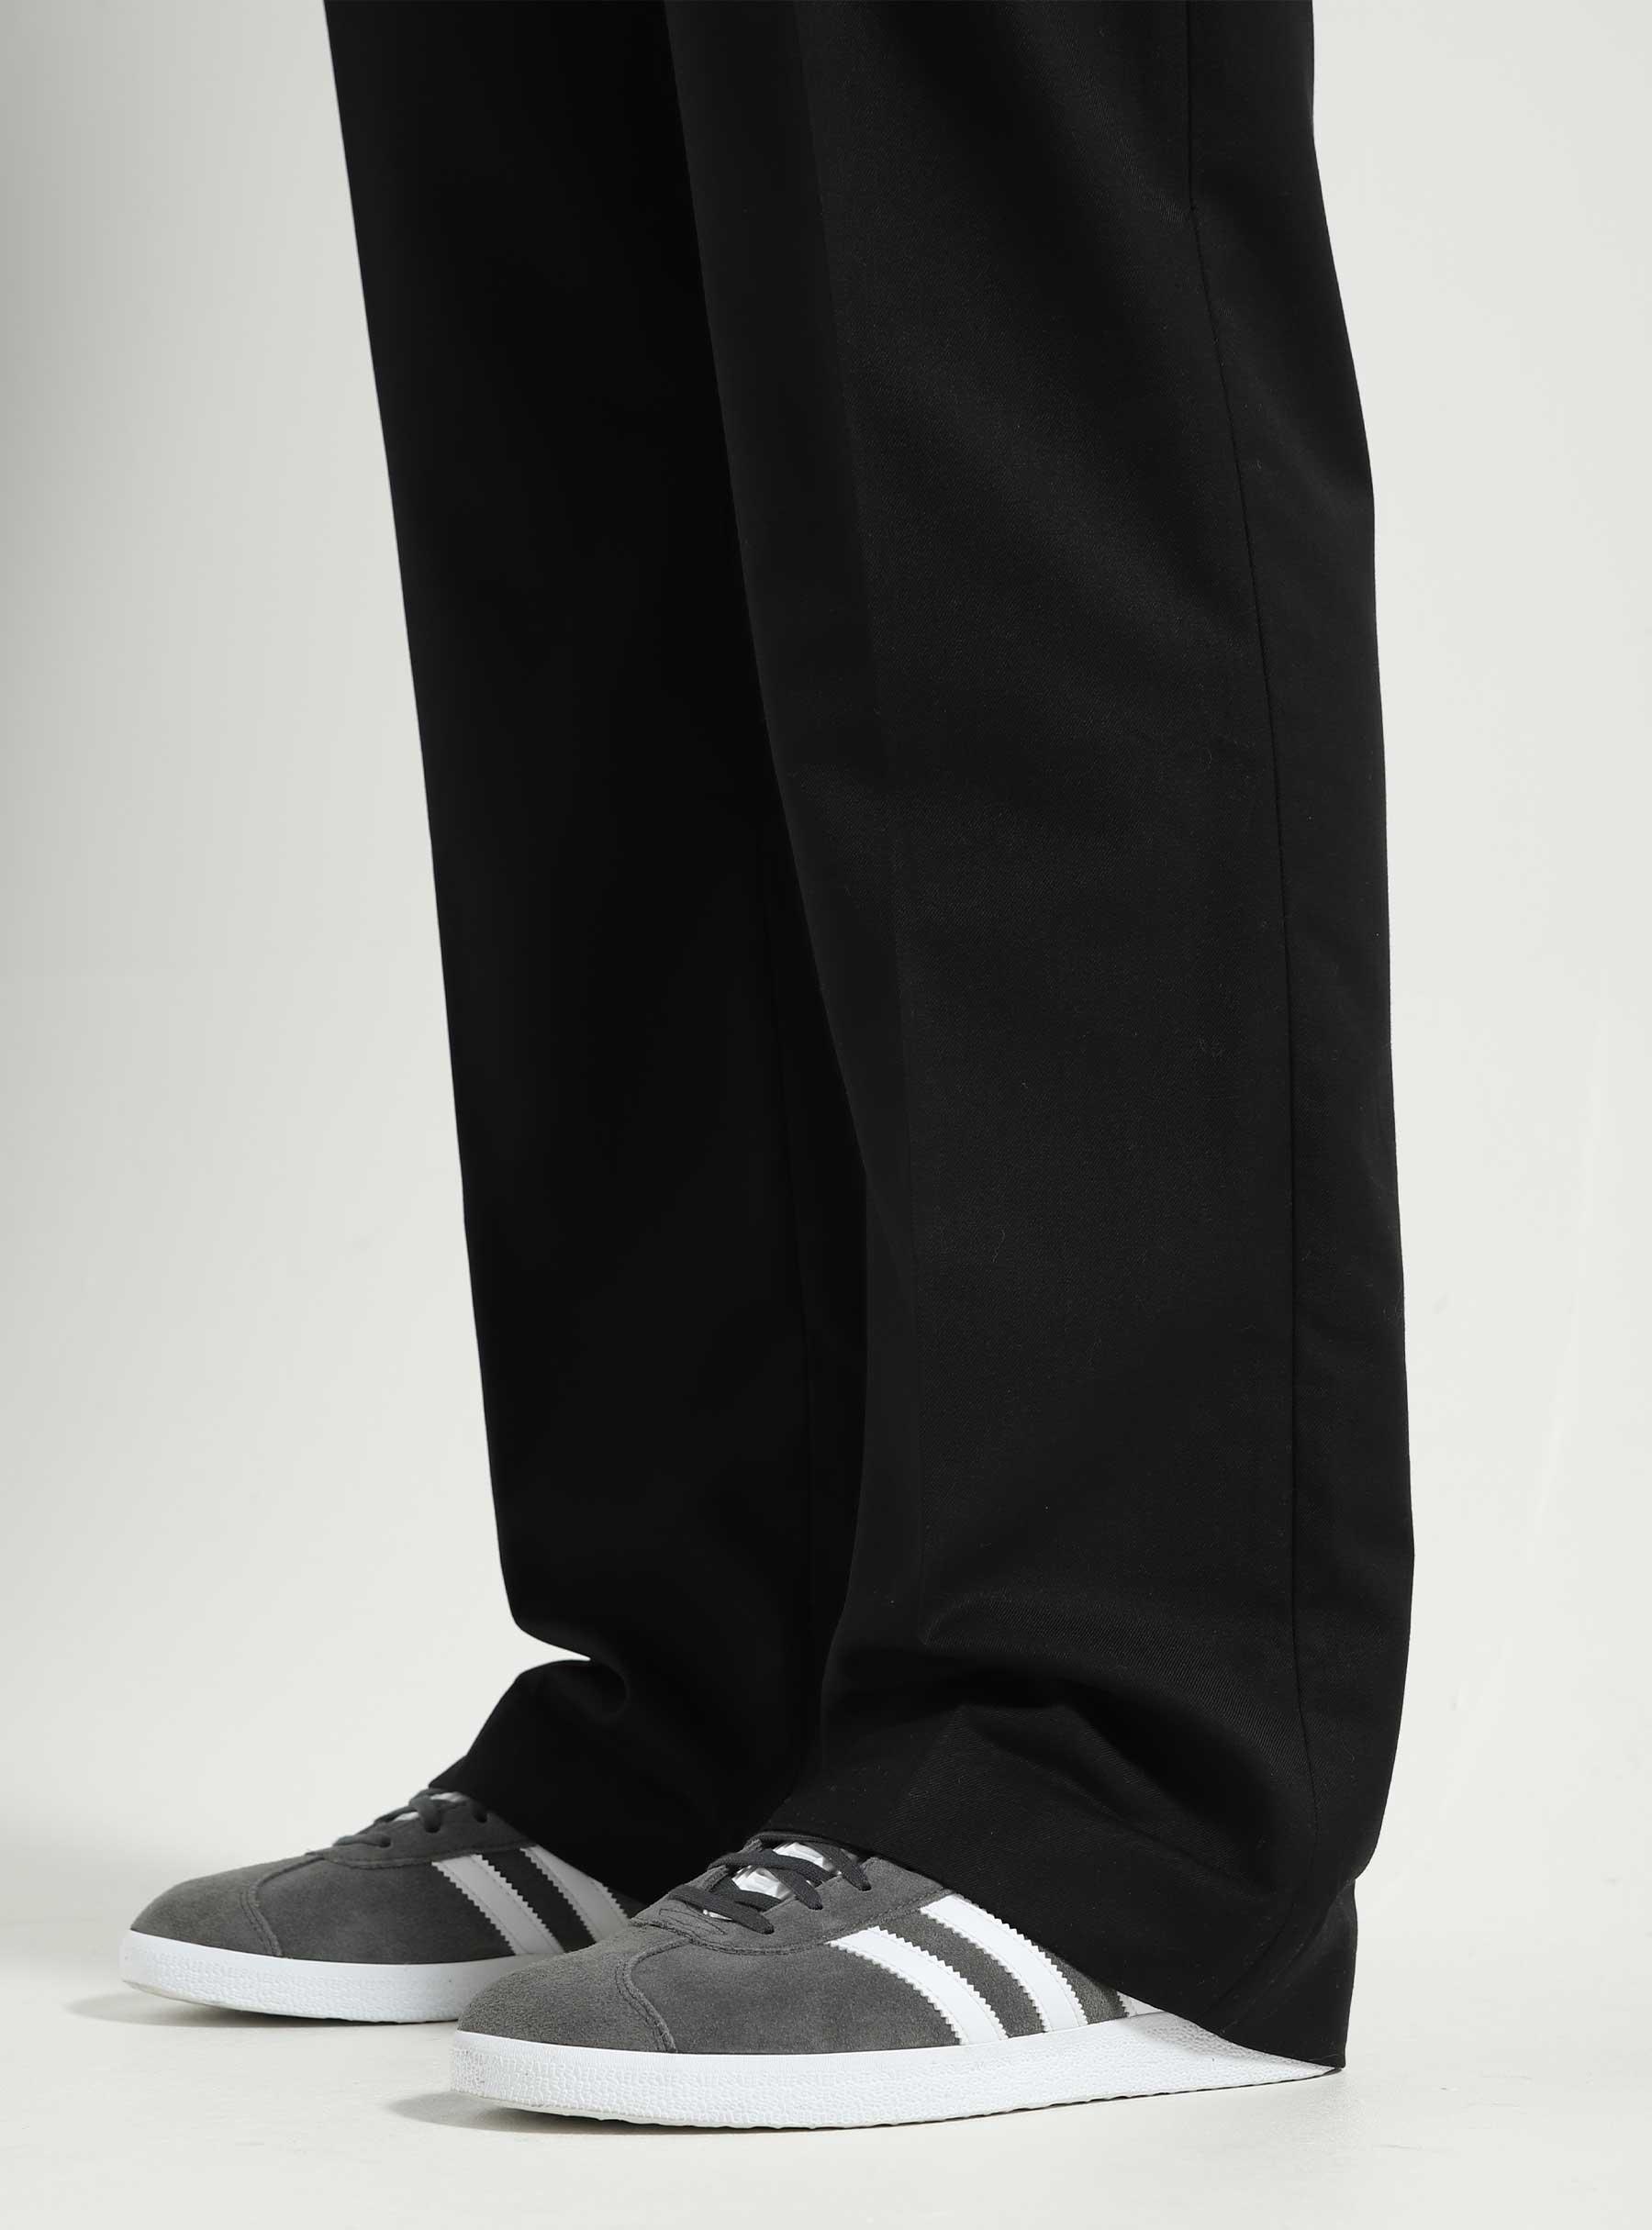 Tailored Trousers Black M150404